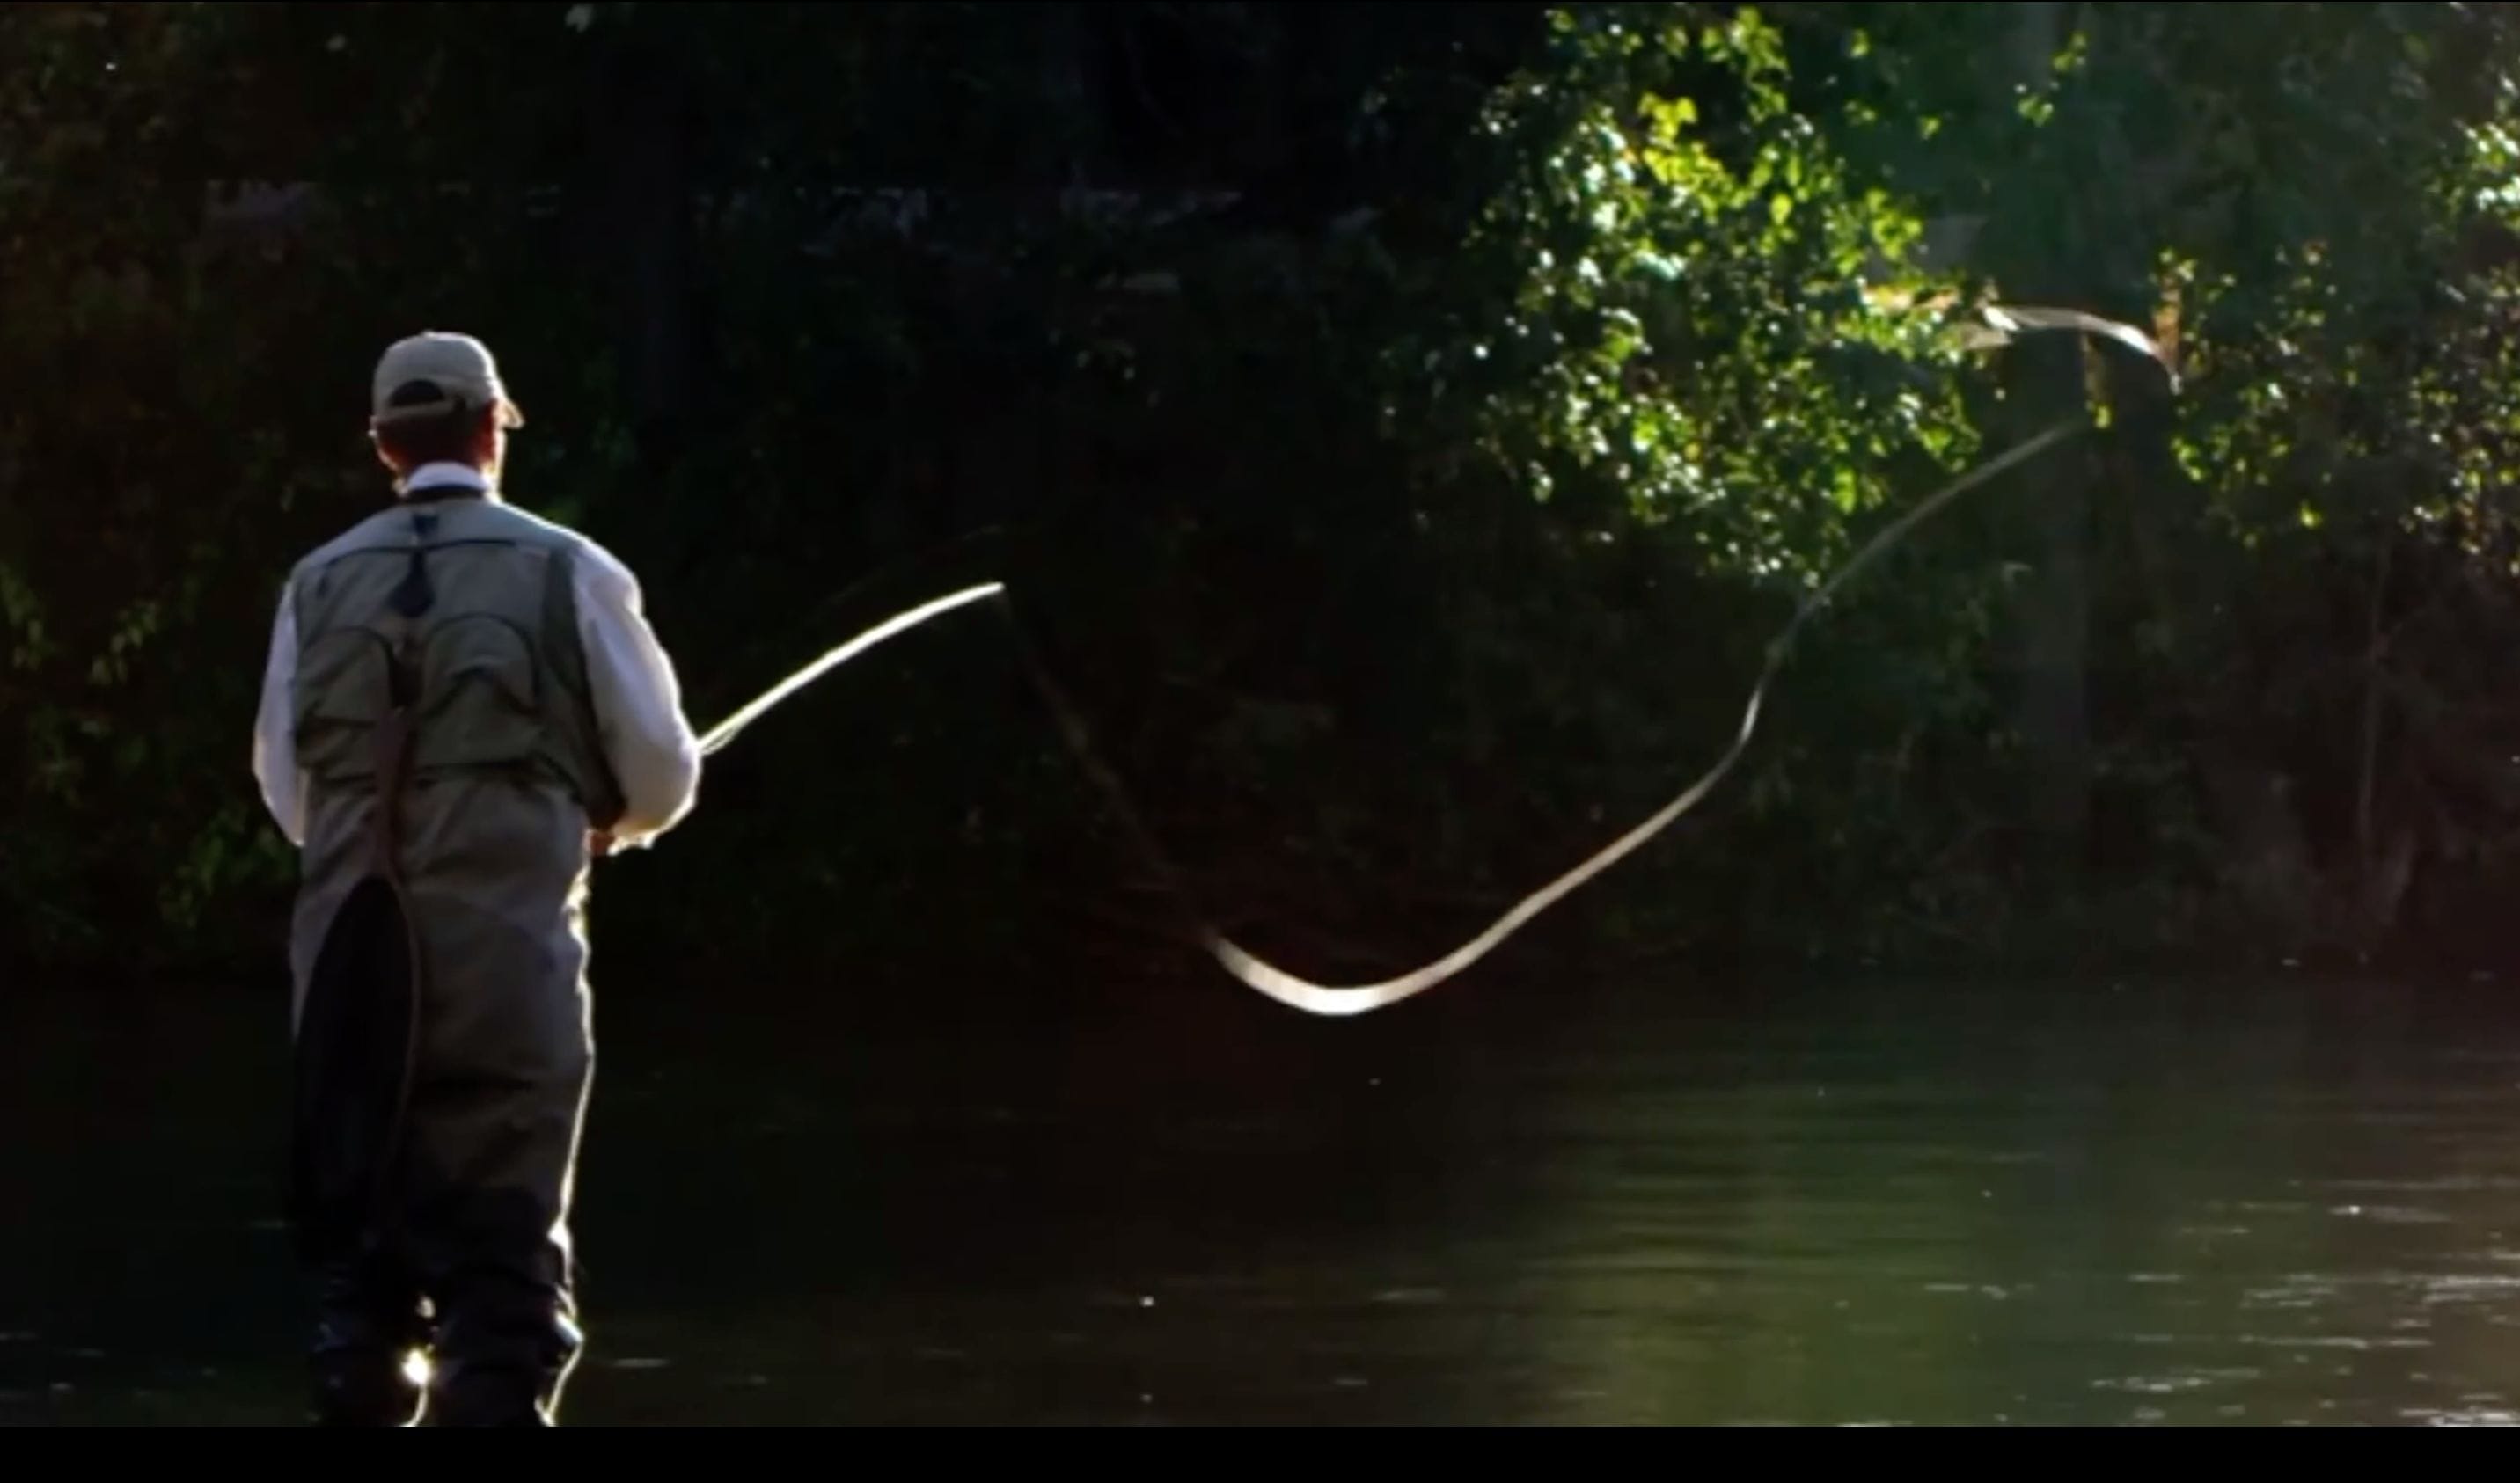 A man is standing in a river with a fly rod.